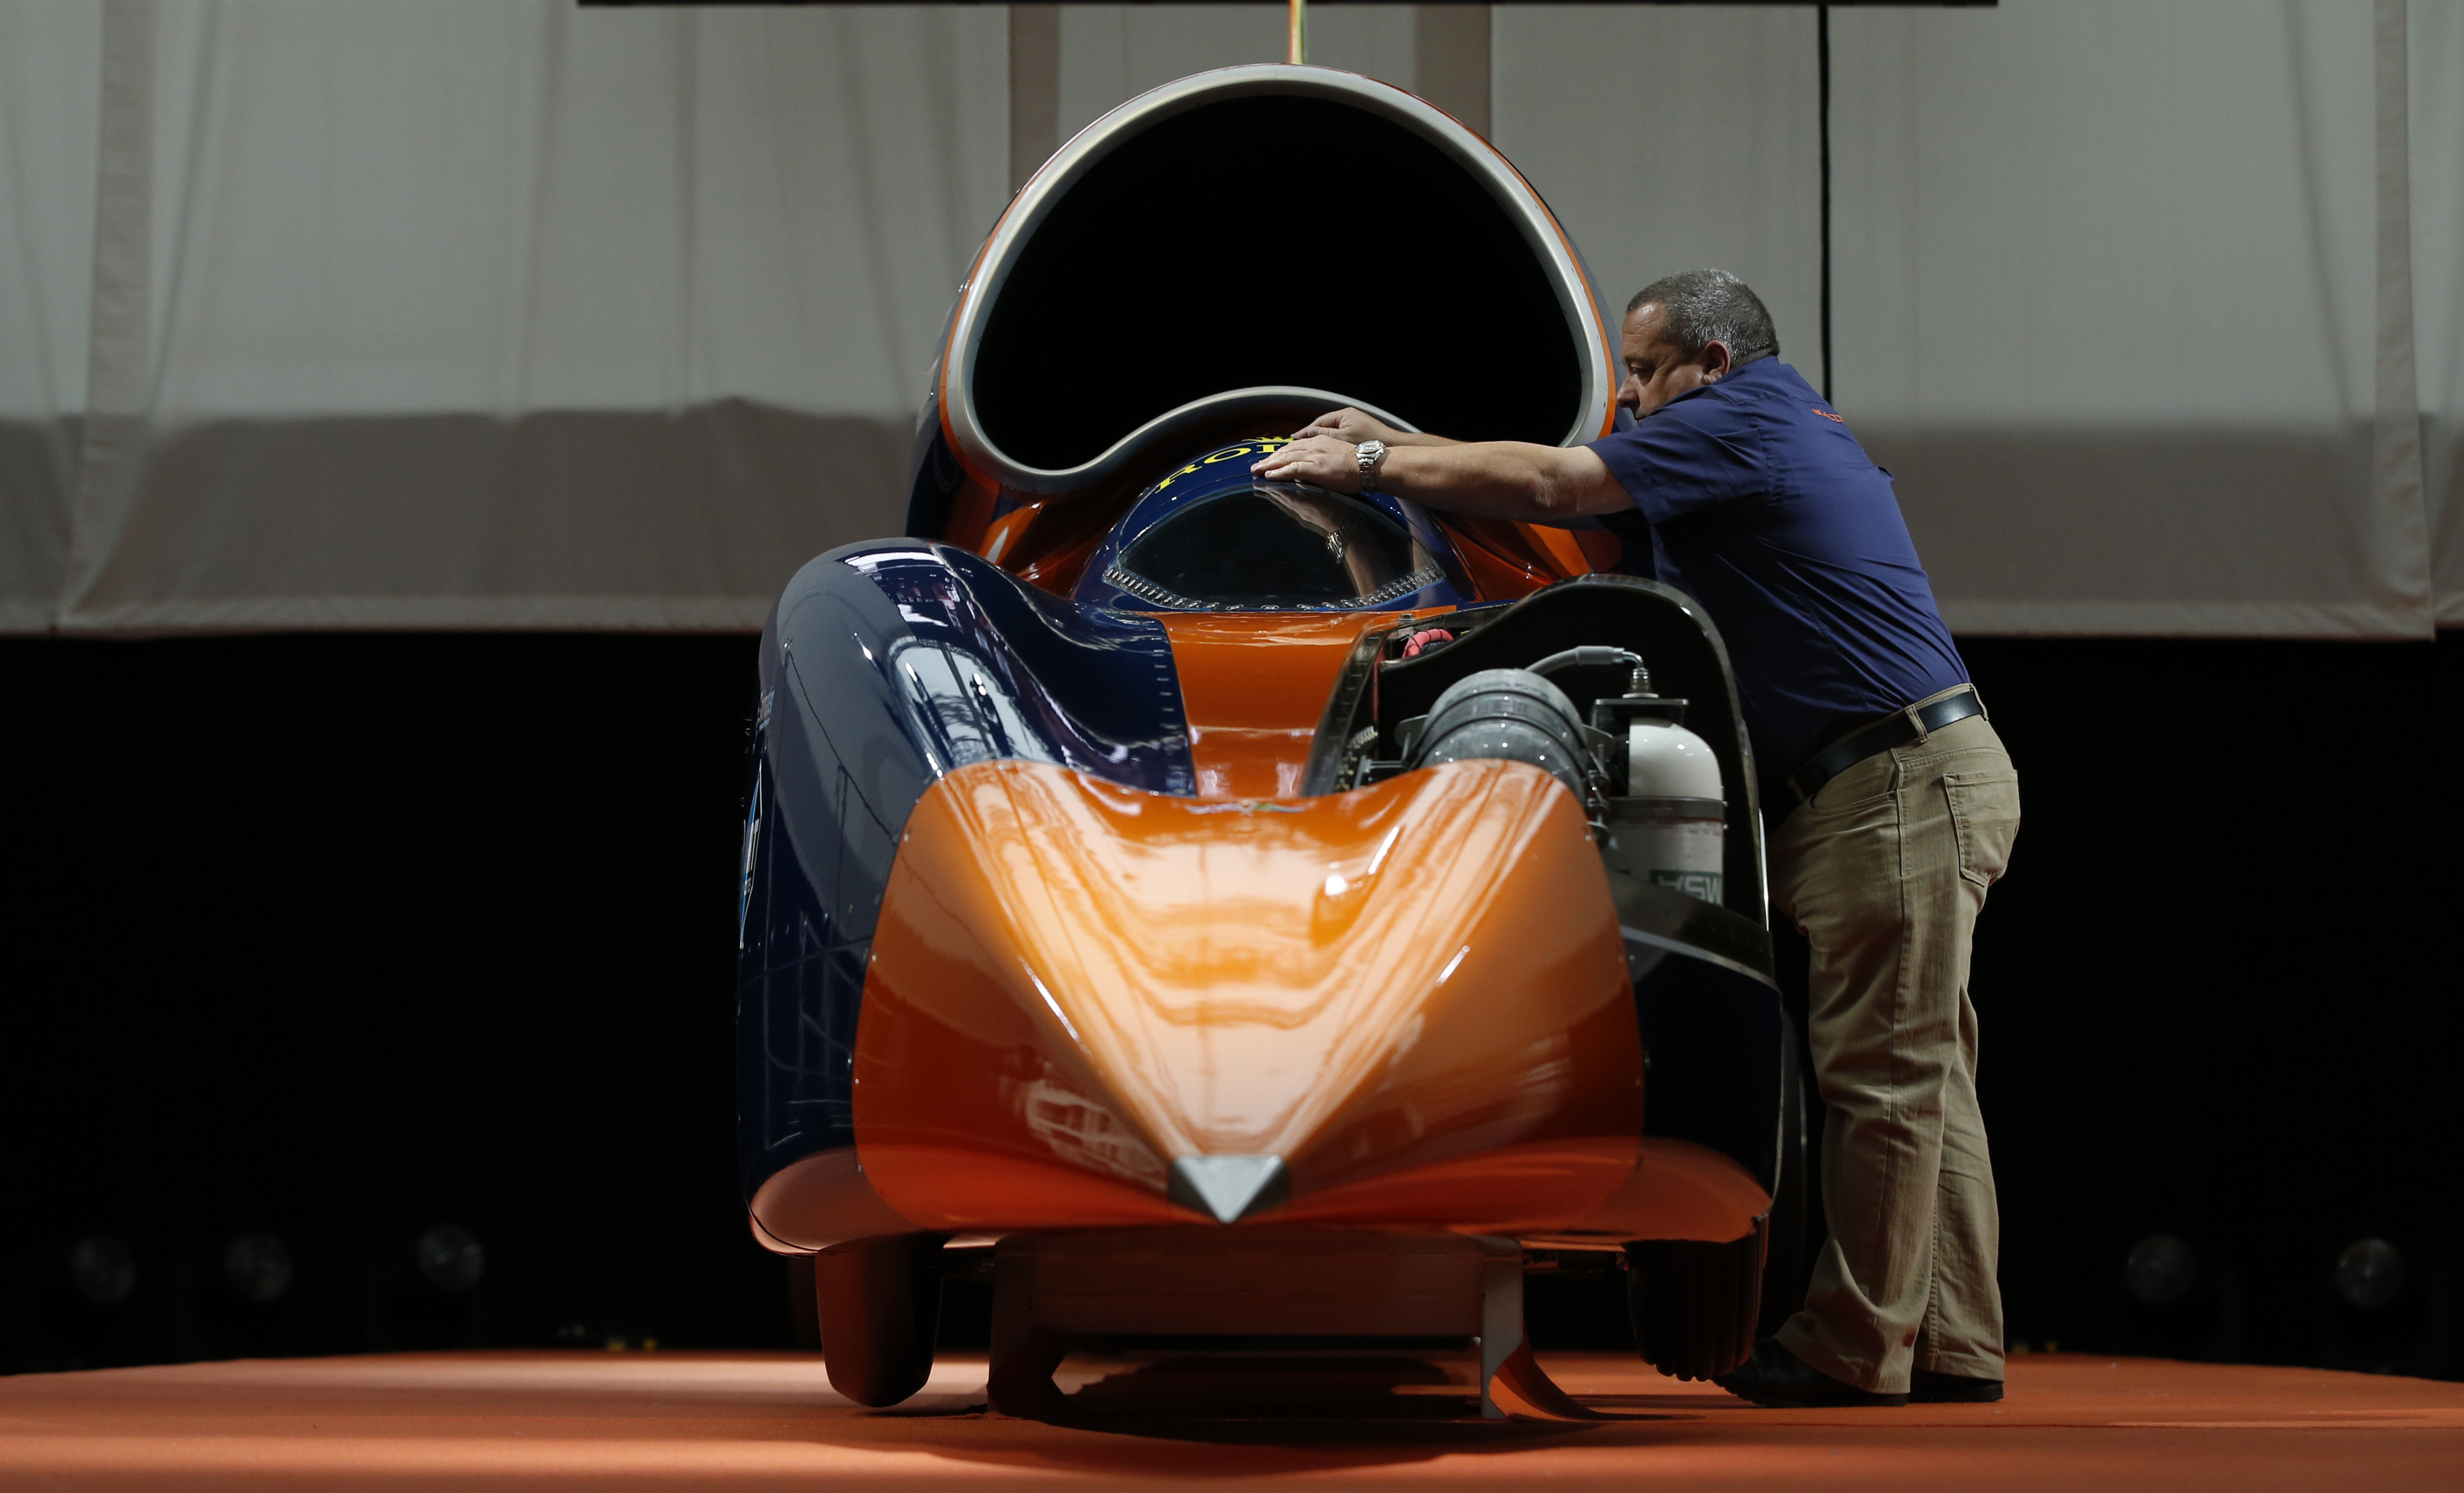 A technician places the cockpit cover on the British backed Bloodhound SSC streamliner car in London on Thursday, Sept. 24, 2015 (Alastair Grant&mdash;AP)